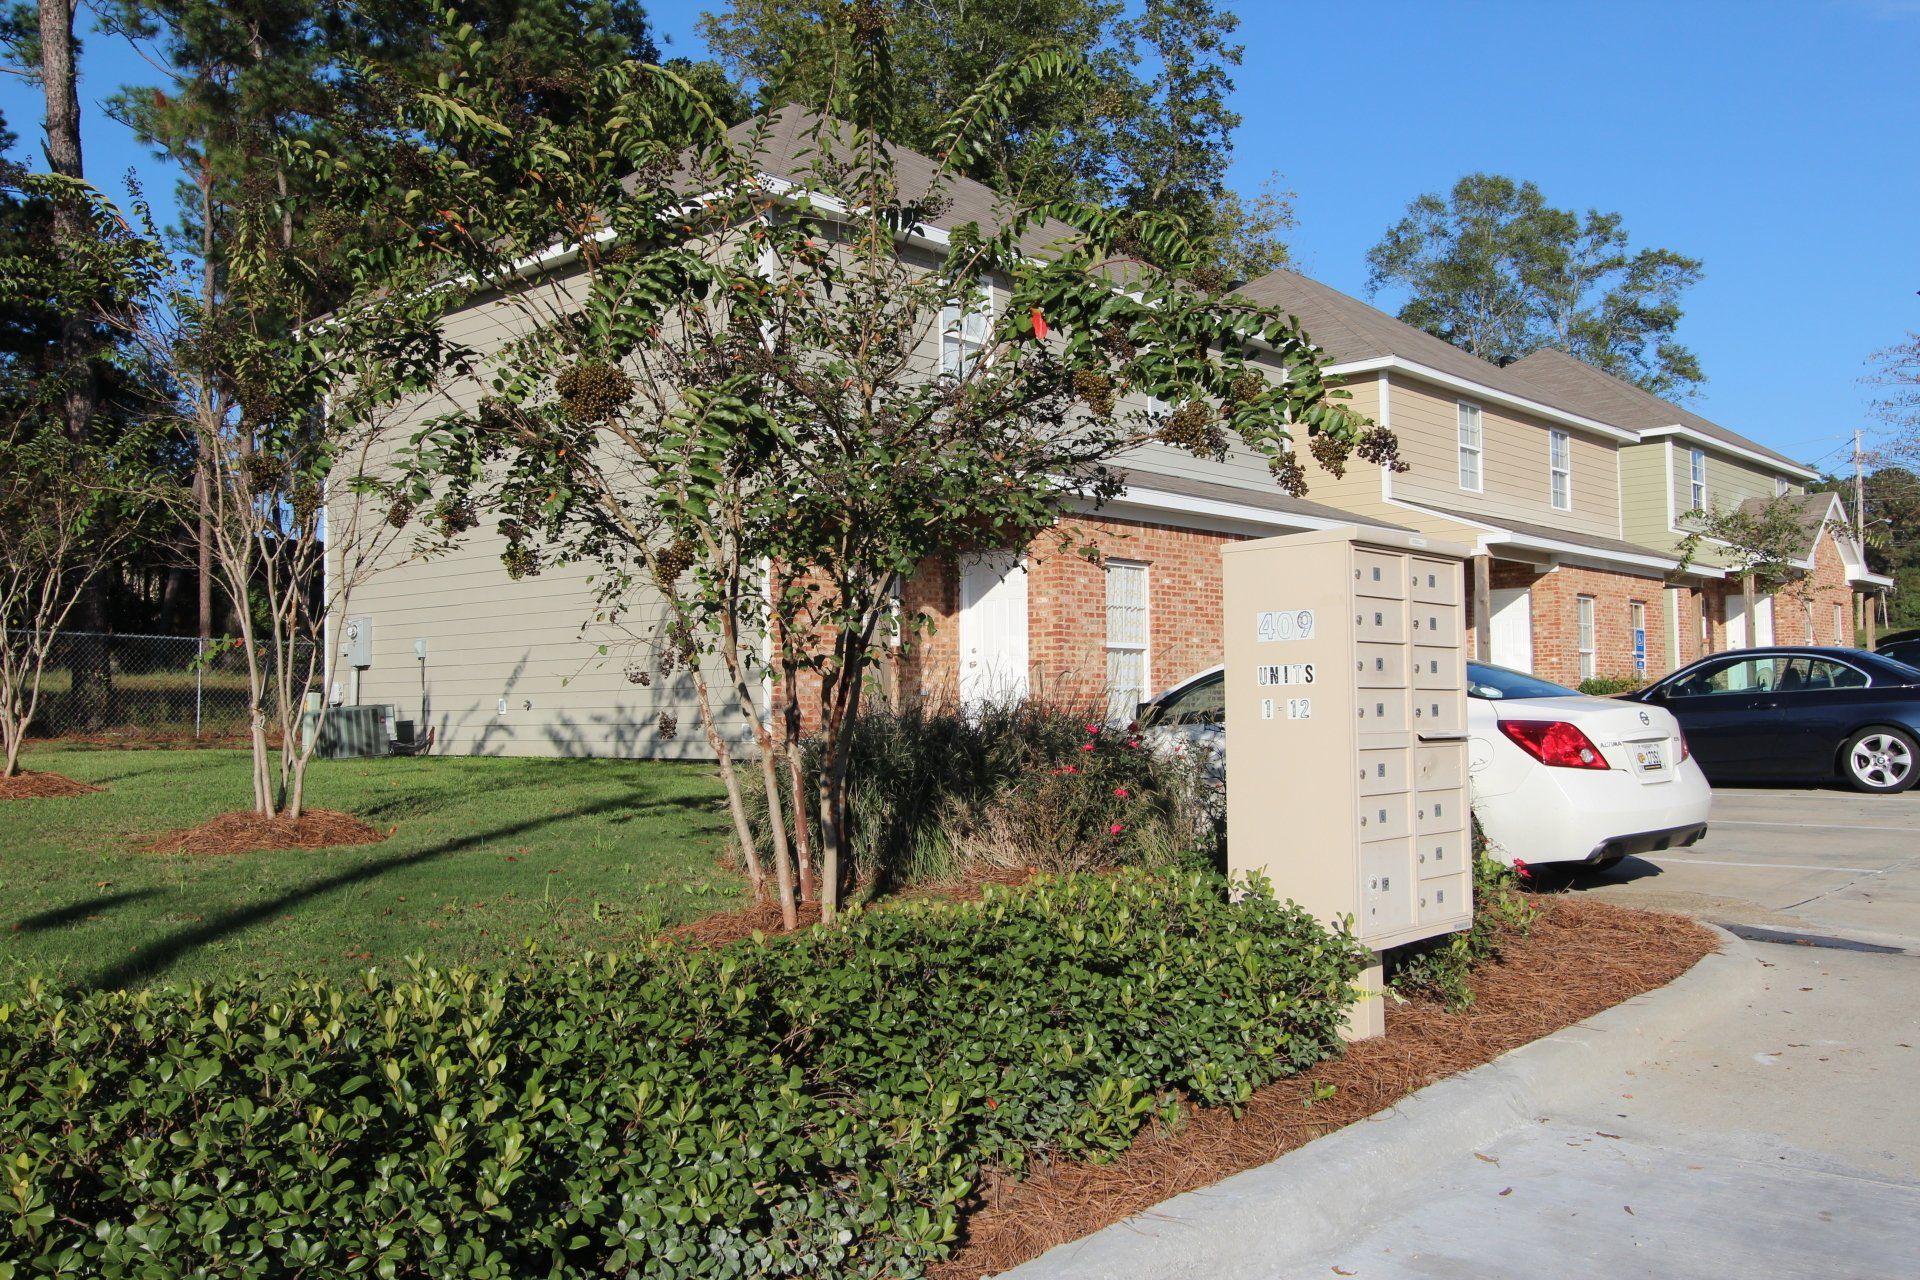 Simple Apartments Near University Of Southern Mississippi Hattiesburg with Best Design